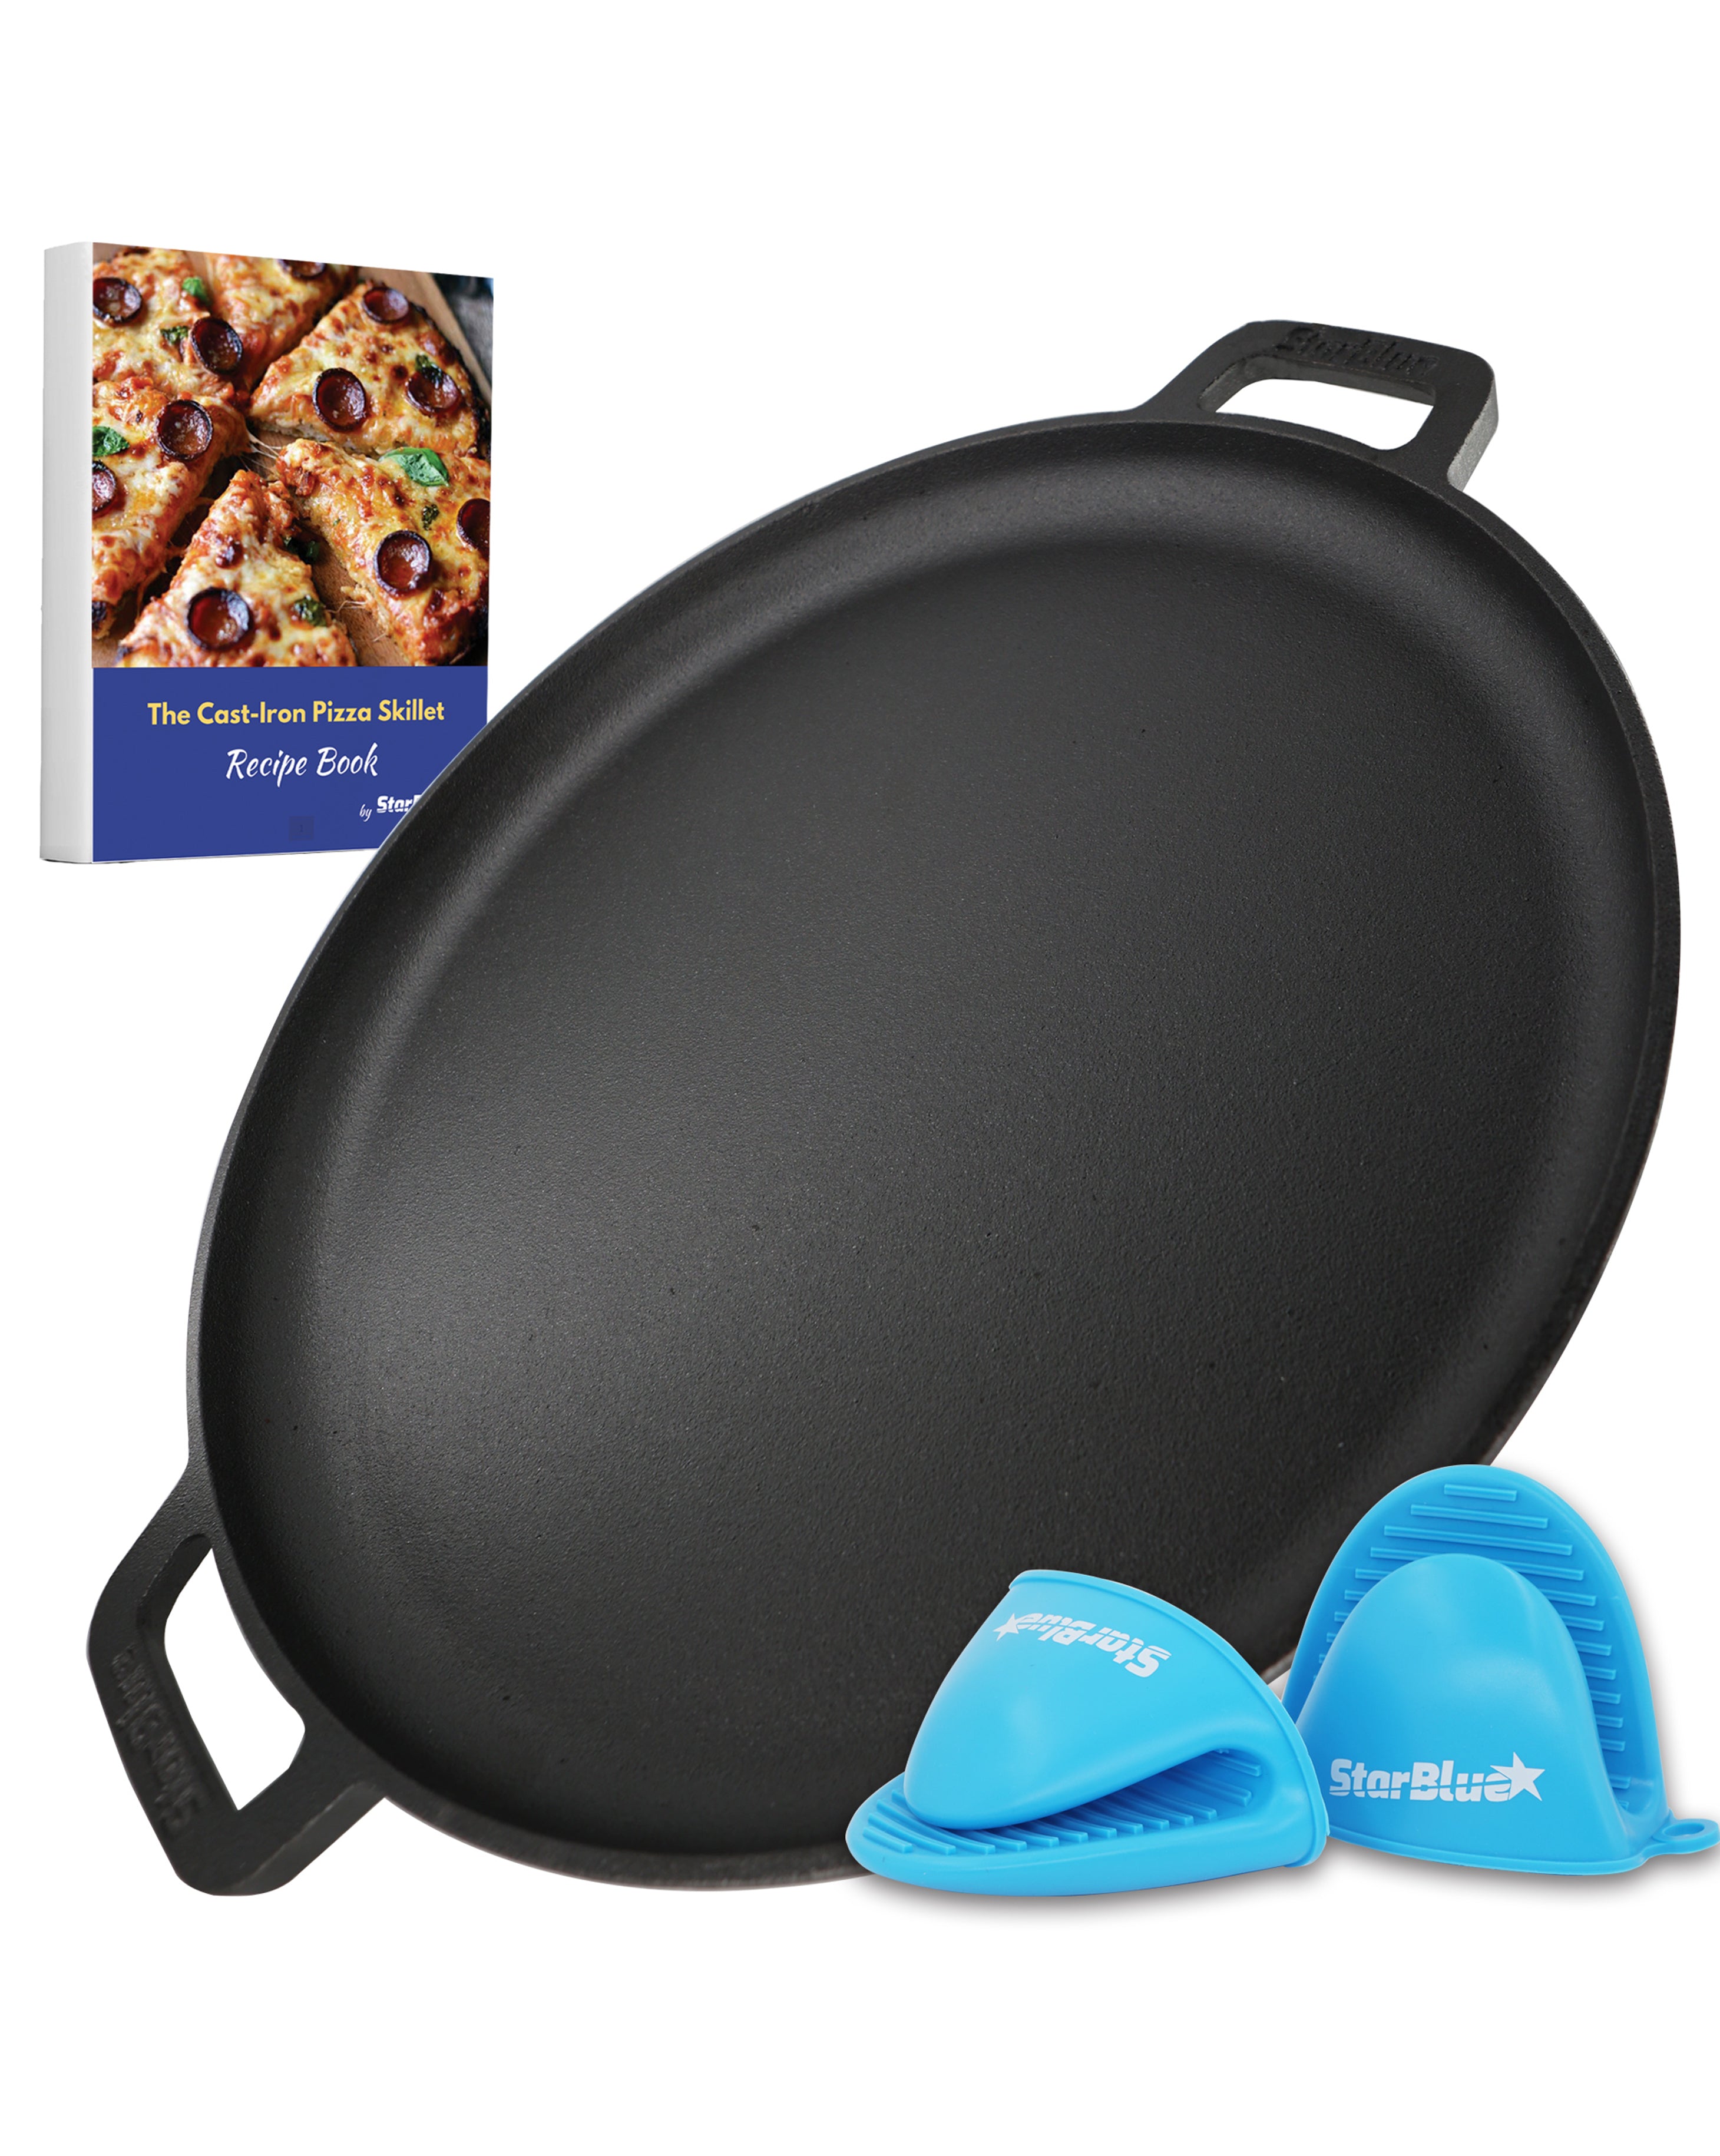 StarBlue 16 inch Cast Iron Pizza Pan Round Griddle with Free Silicone Handles and 30 Recipes Ebook– Pre-Seasoned Comal, Kitchen Essentials for